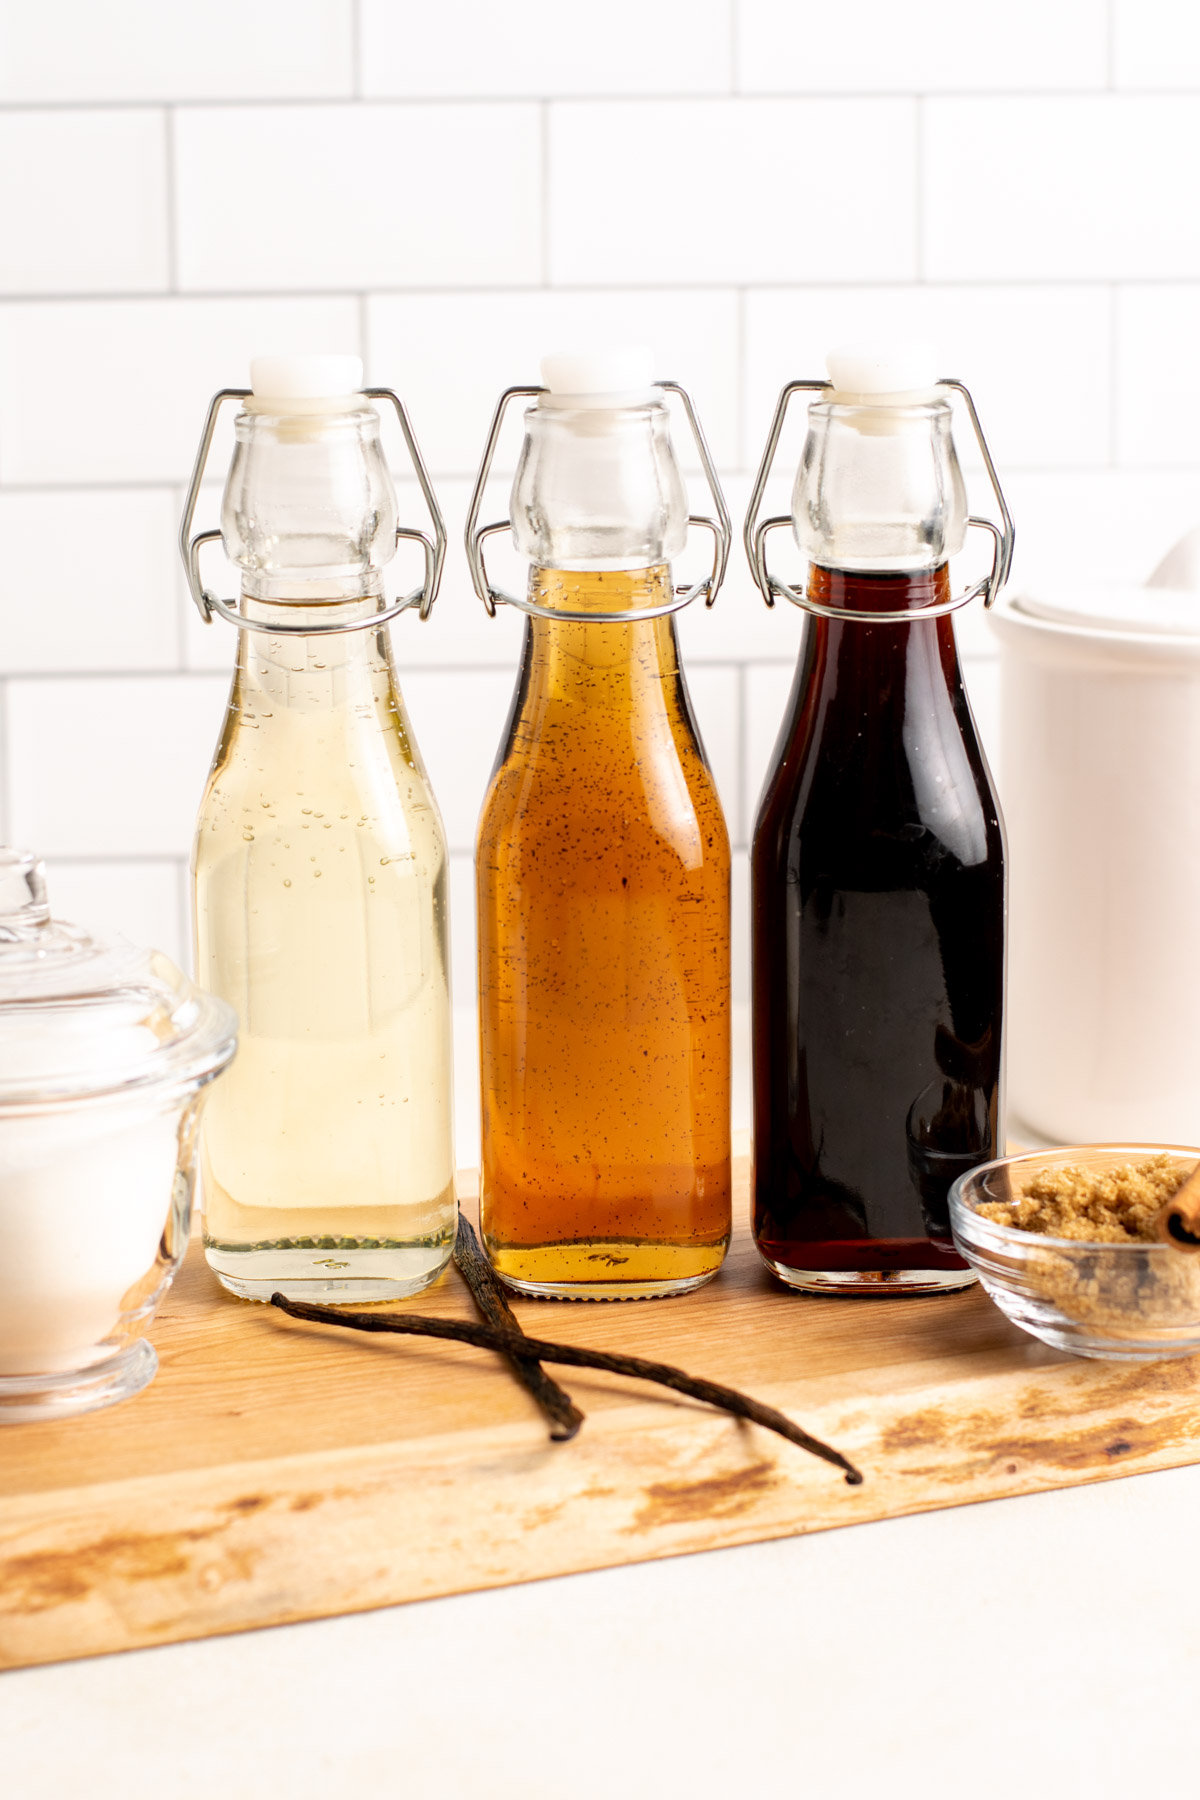 3 glass bottles of syrups, classic, vanilla, and brown sugar.